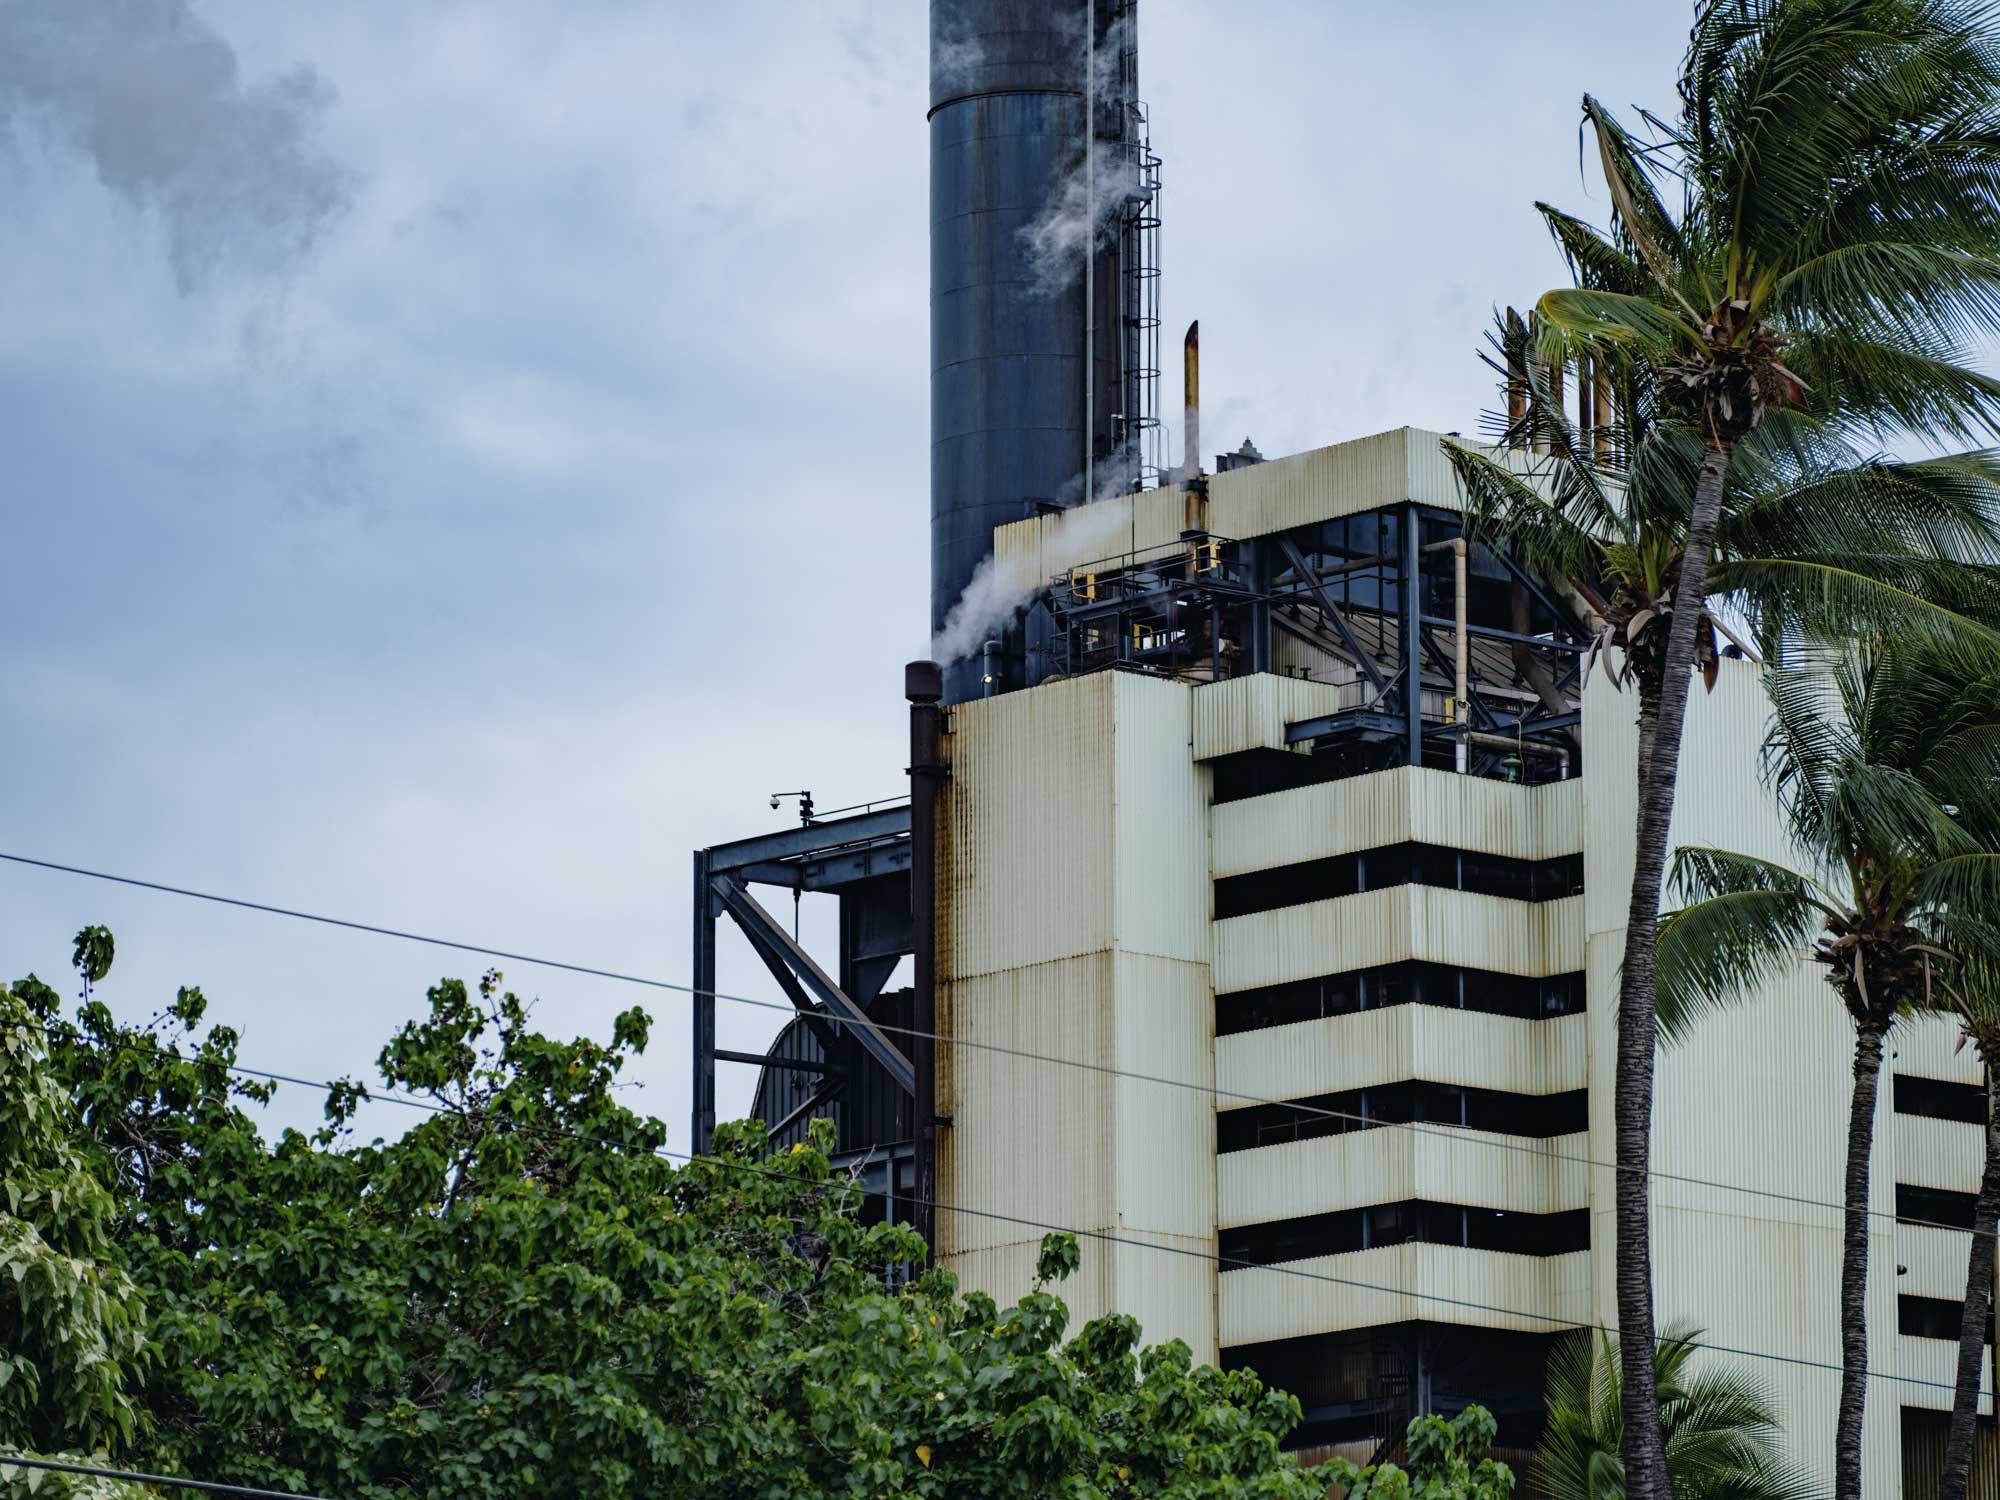 Photograph of a power plan in Kapolei, Oahu. The photo shows a white, multistory building rising behind treetops. A black smokestack rises behind the building, but the top of the smokestack is not visible.